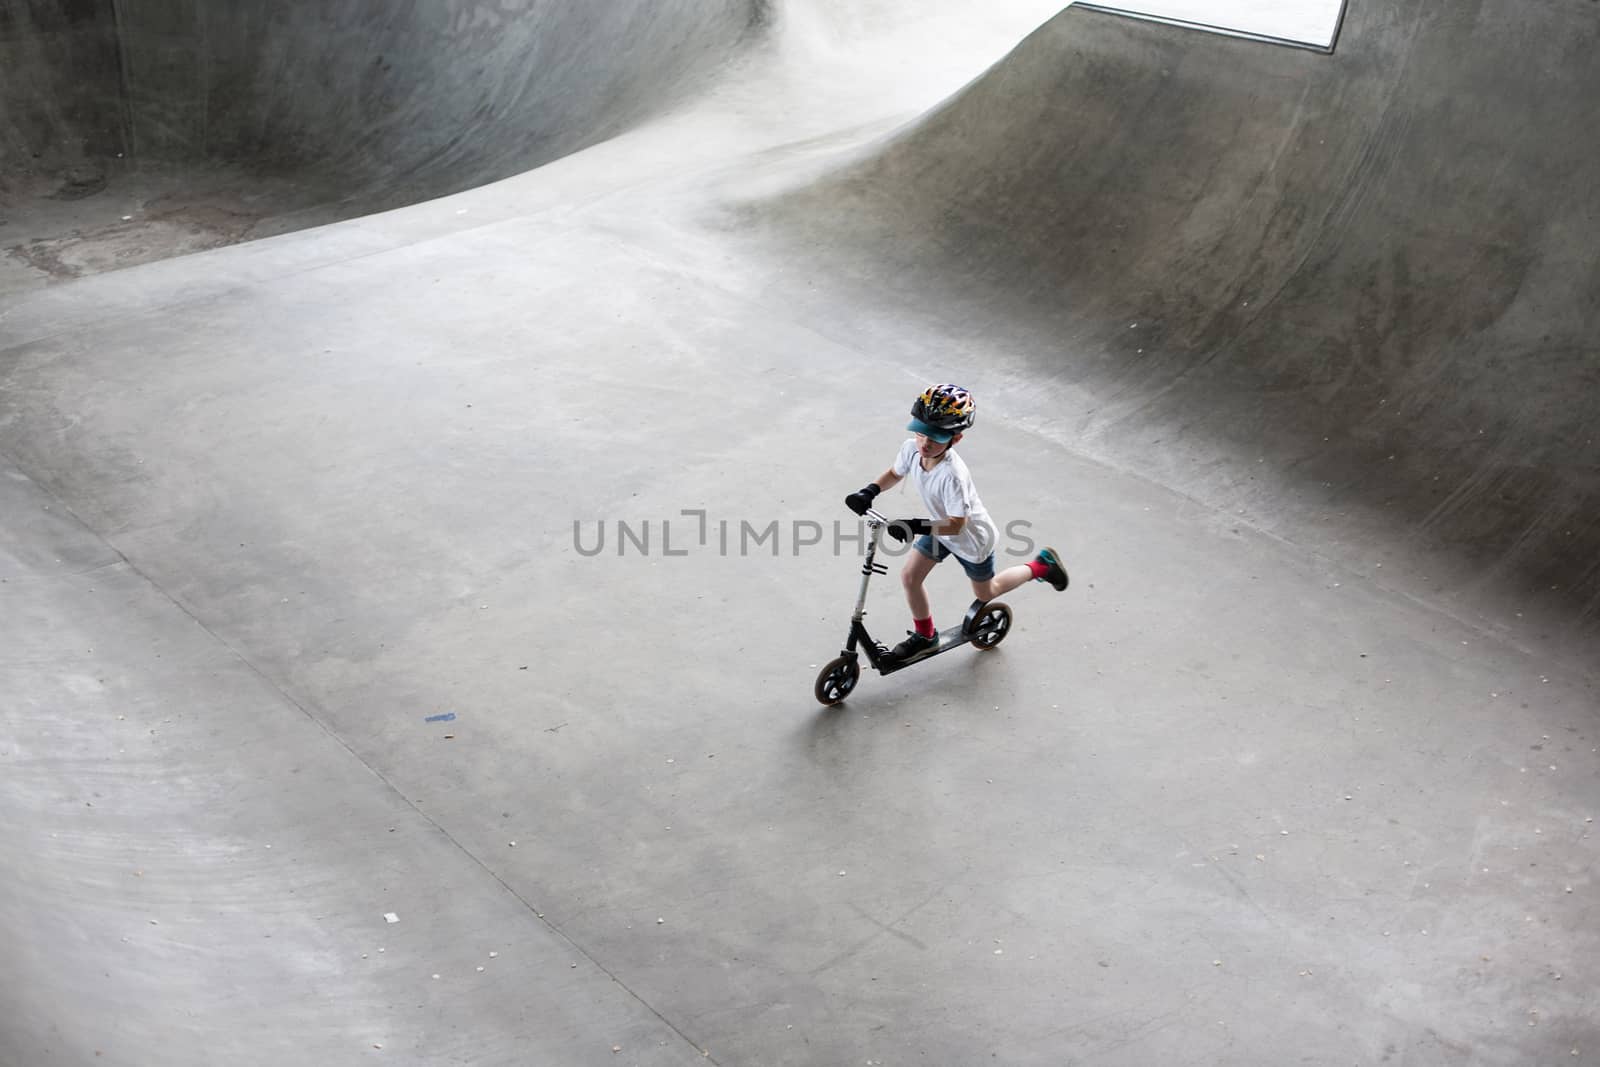 Powerful funny young guys are trained in a skate park Stockholm, Sweden. Leisure, playing, trick